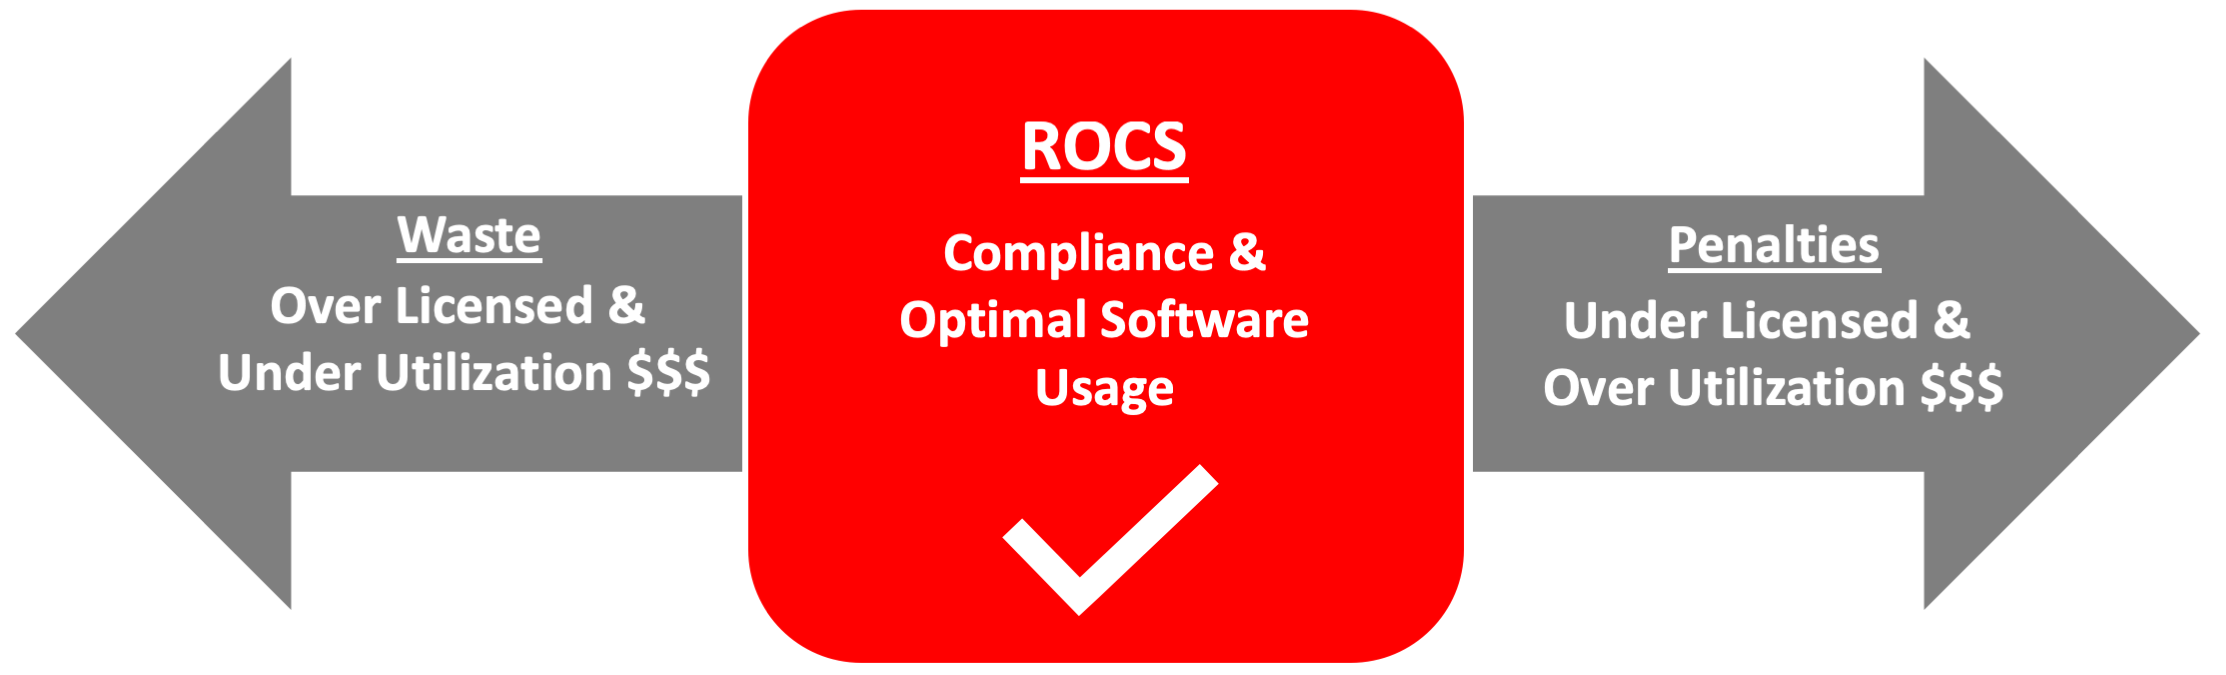 Our research uncovered 90% Oracle non-compliance in the cases we examined. Don't be misled by technology license agreements. Achieve compliance and optimize your Oracle software usage